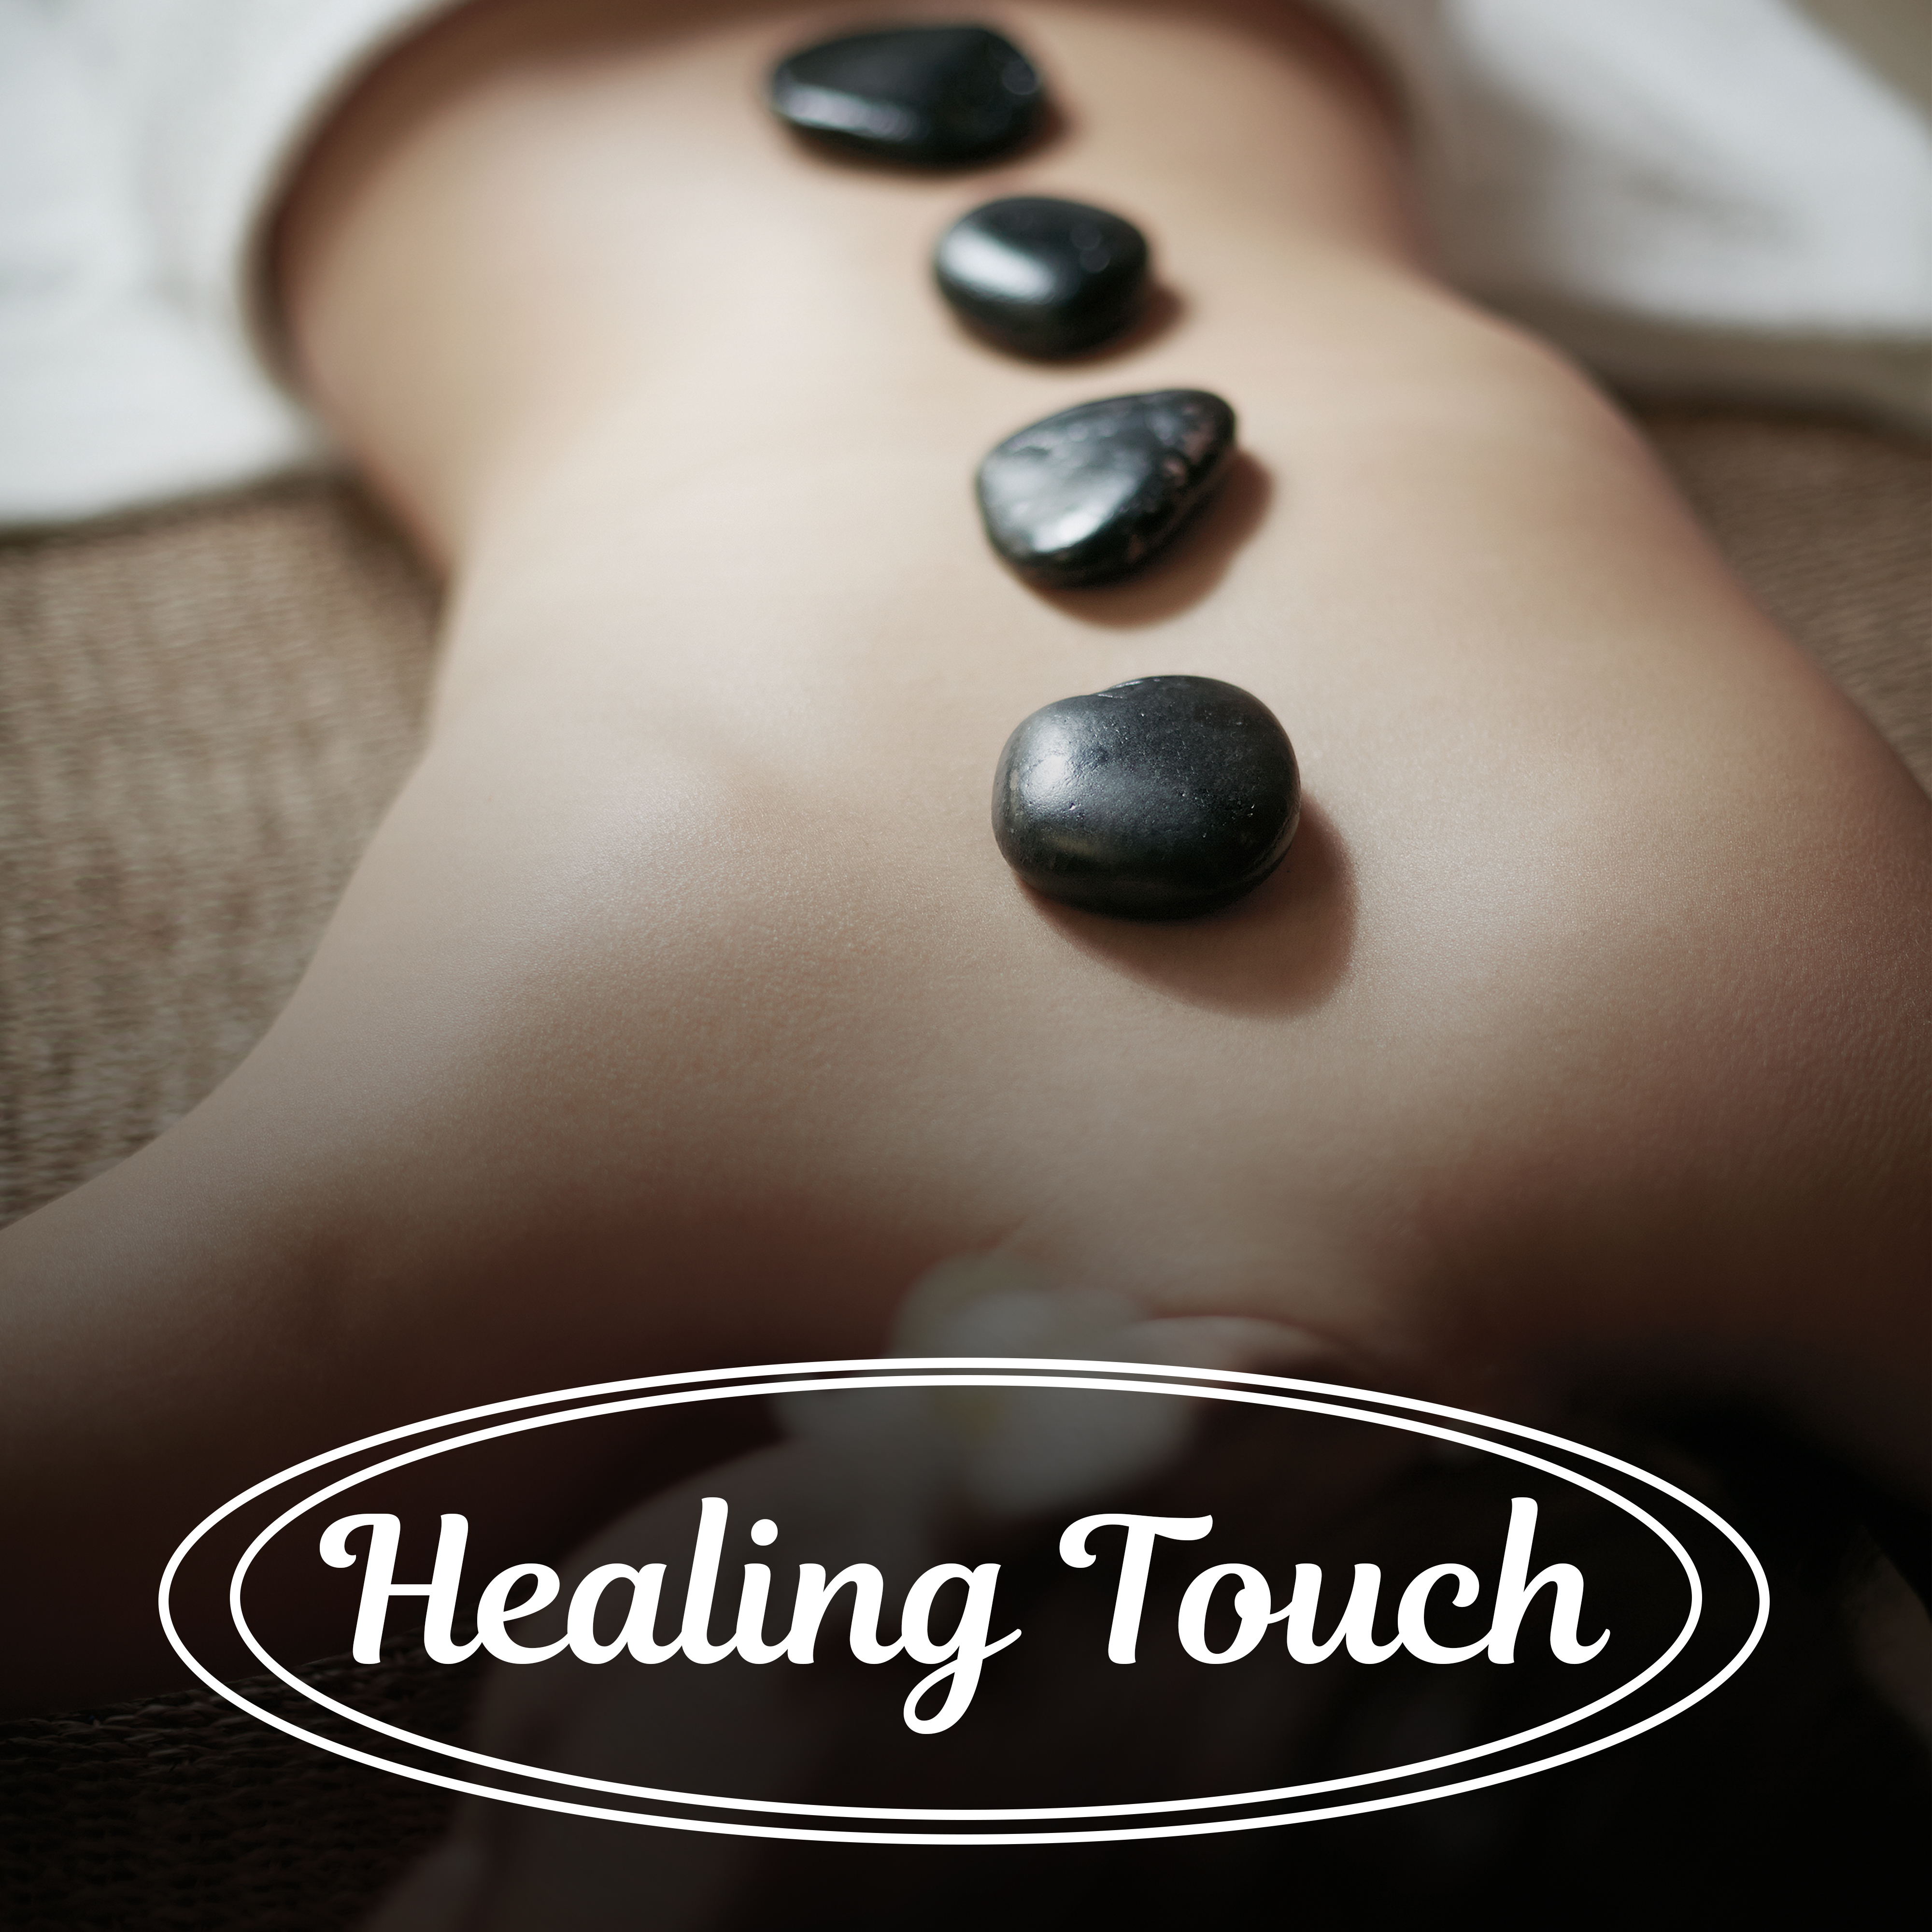 Healing Touch – Relaxation Sounds for Spa, Sensual Massage, Deep Sleep, Healthy Body, Serenity Spa, Relaxed Mind